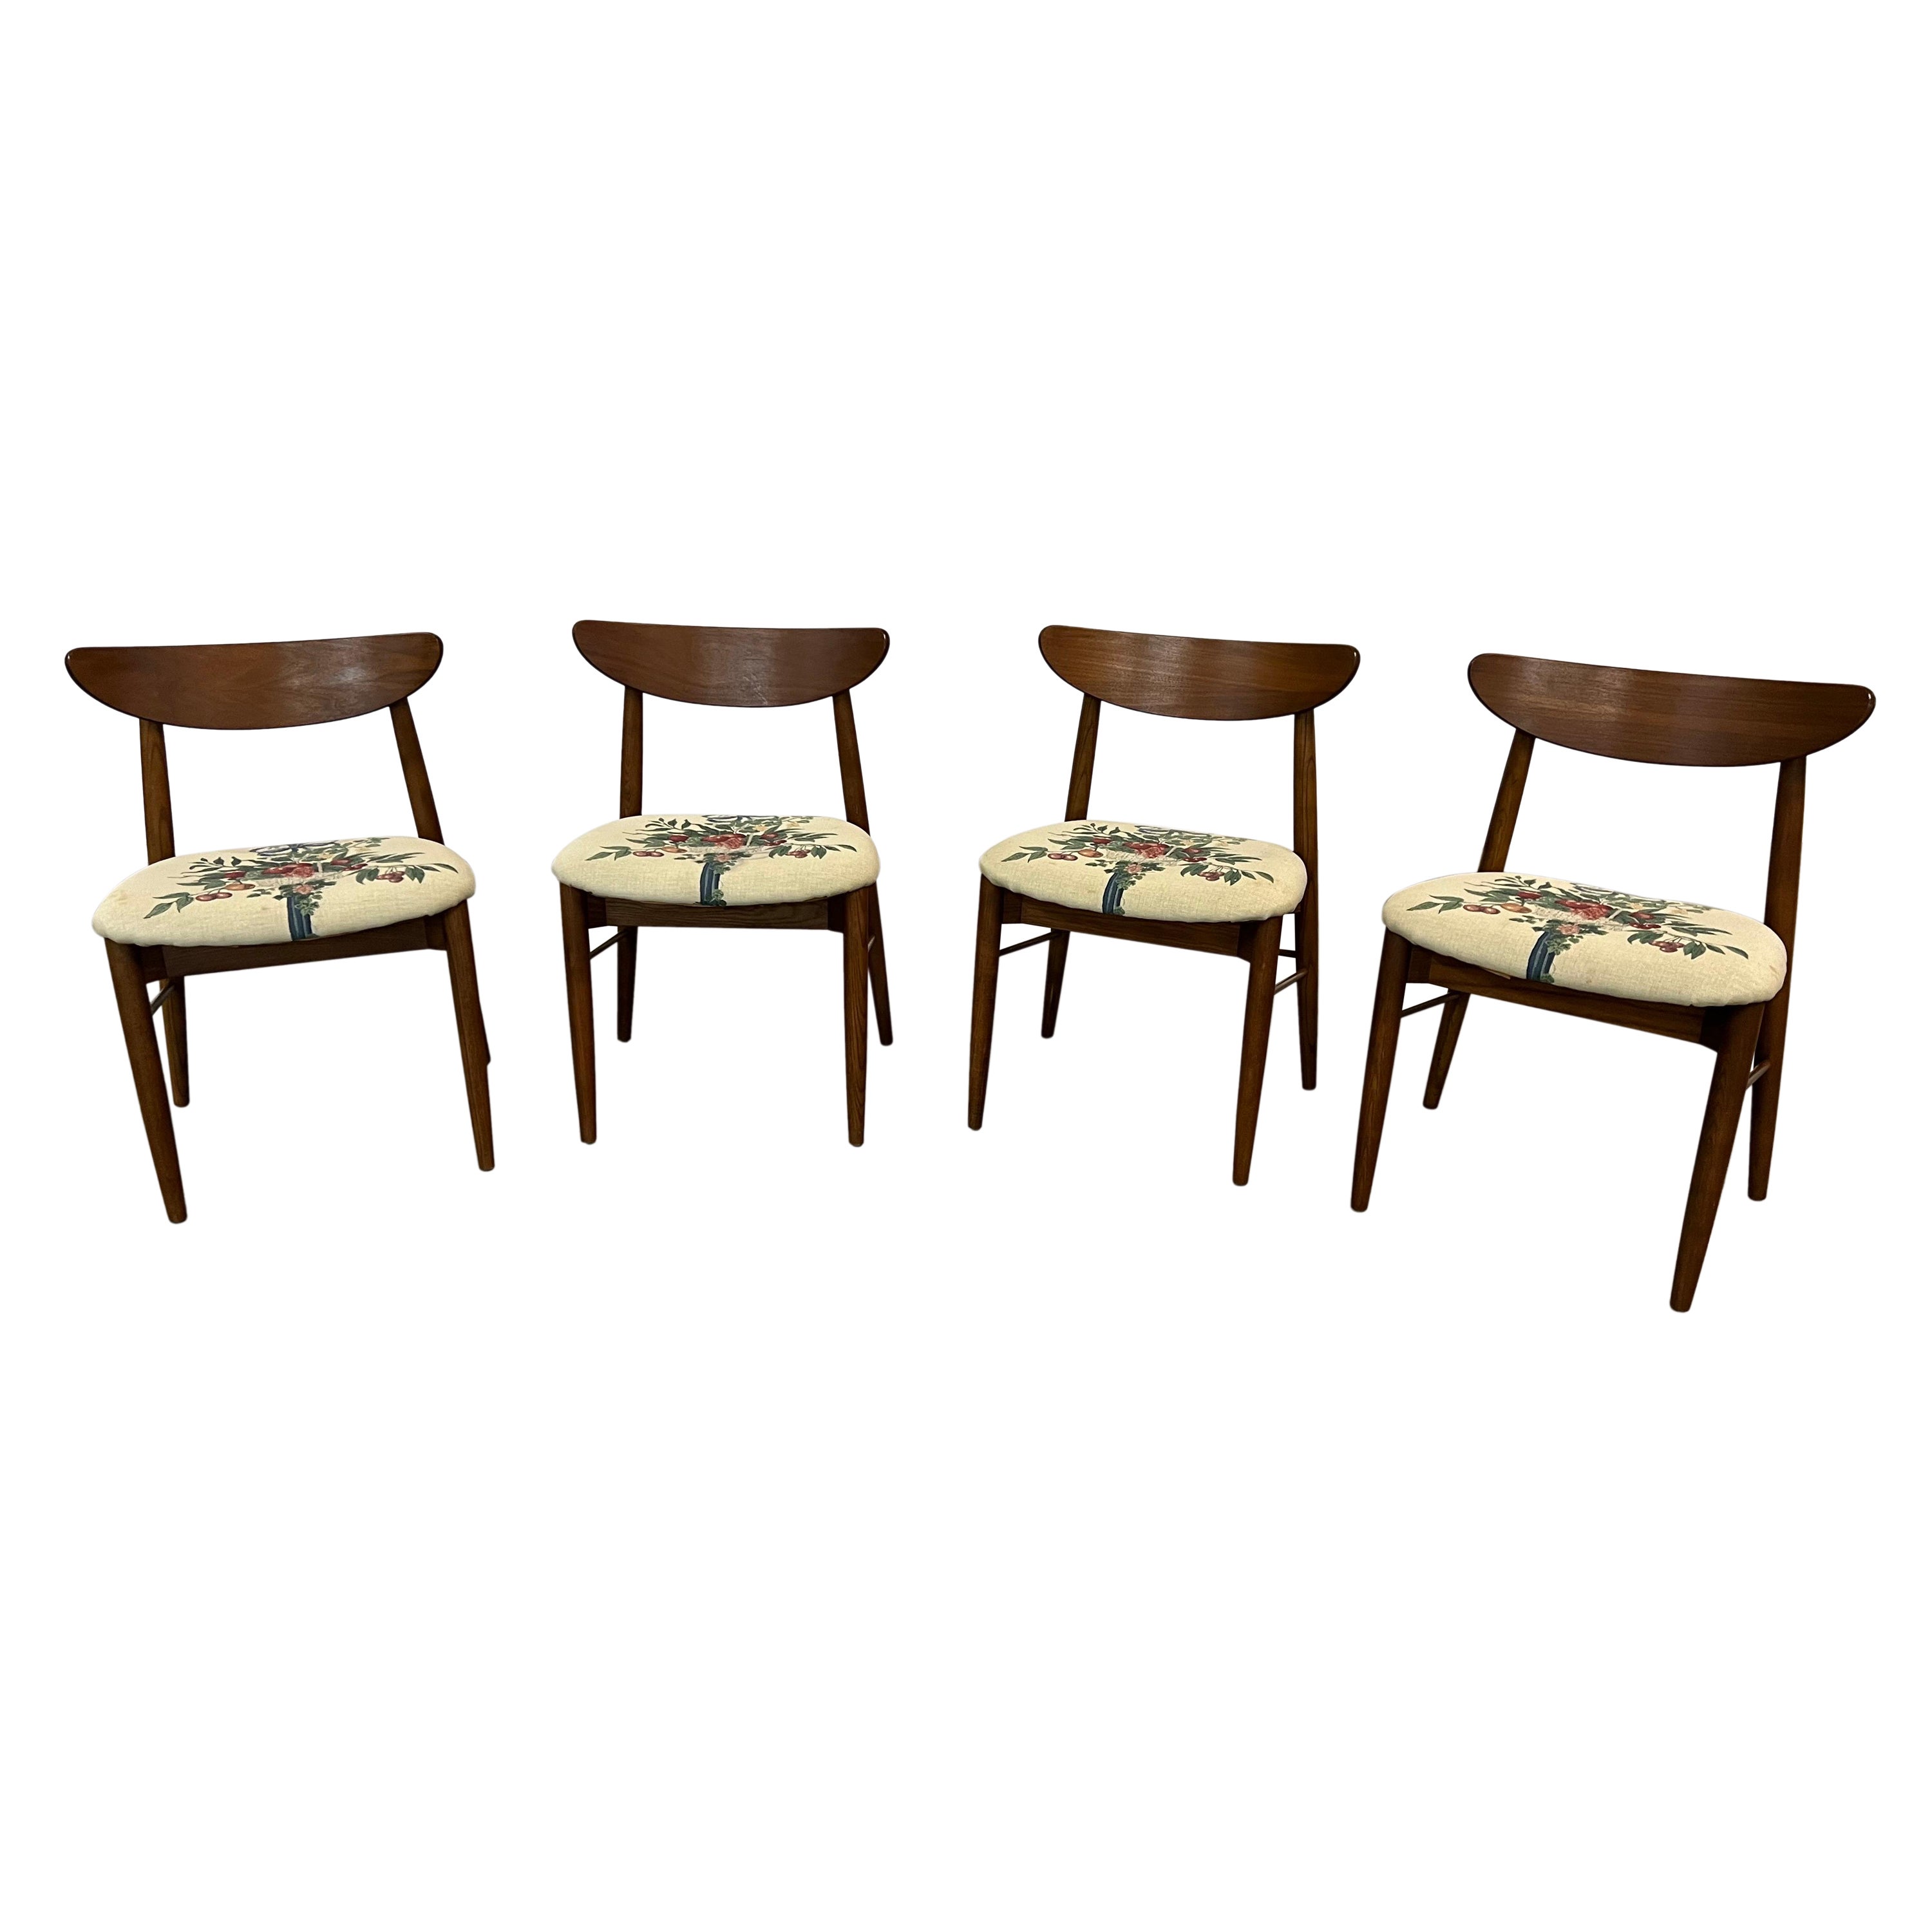  Set of 4 Mid-Century Modern H Paul Browning Shell Back Dining Chairs